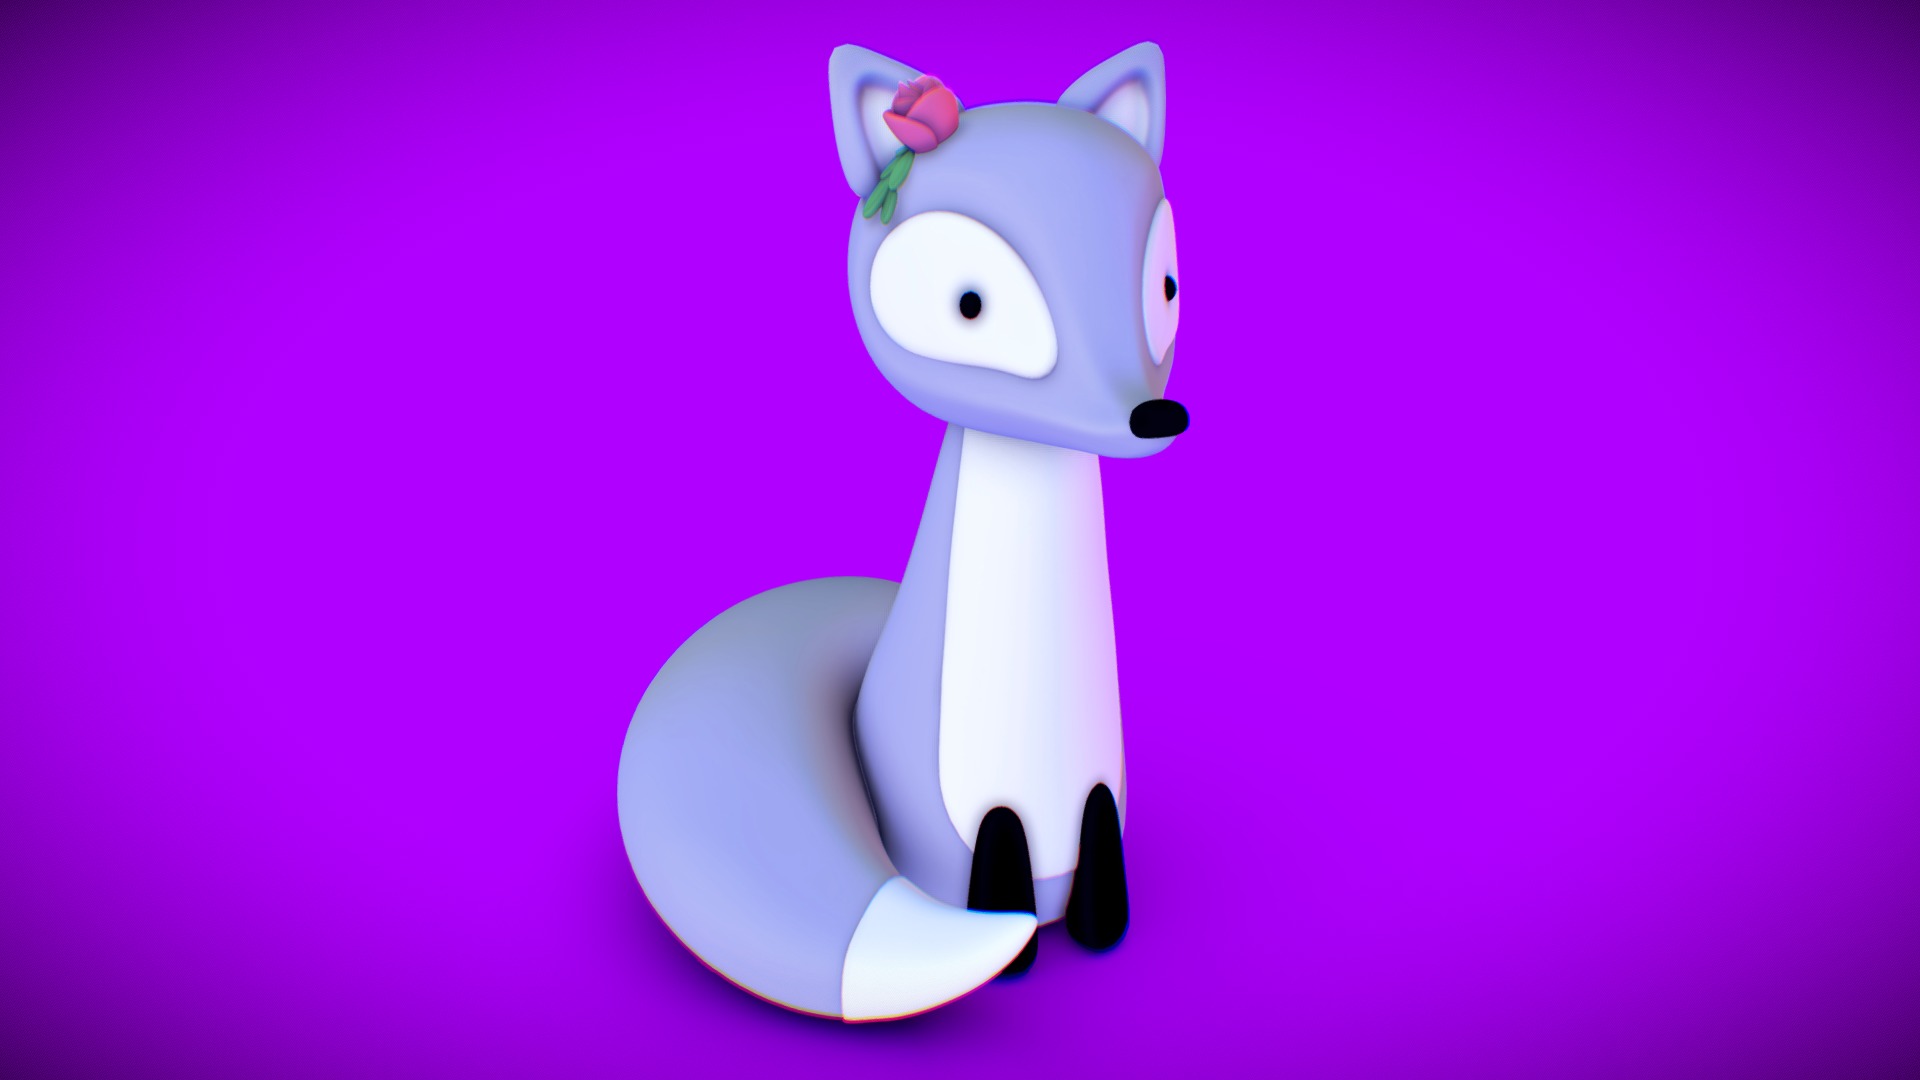 3D model #3December #Day13 The Smug Fox - This is a 3D model of the #3December #Day13 The Smug Fox. The 3D model is about a white toy horse.